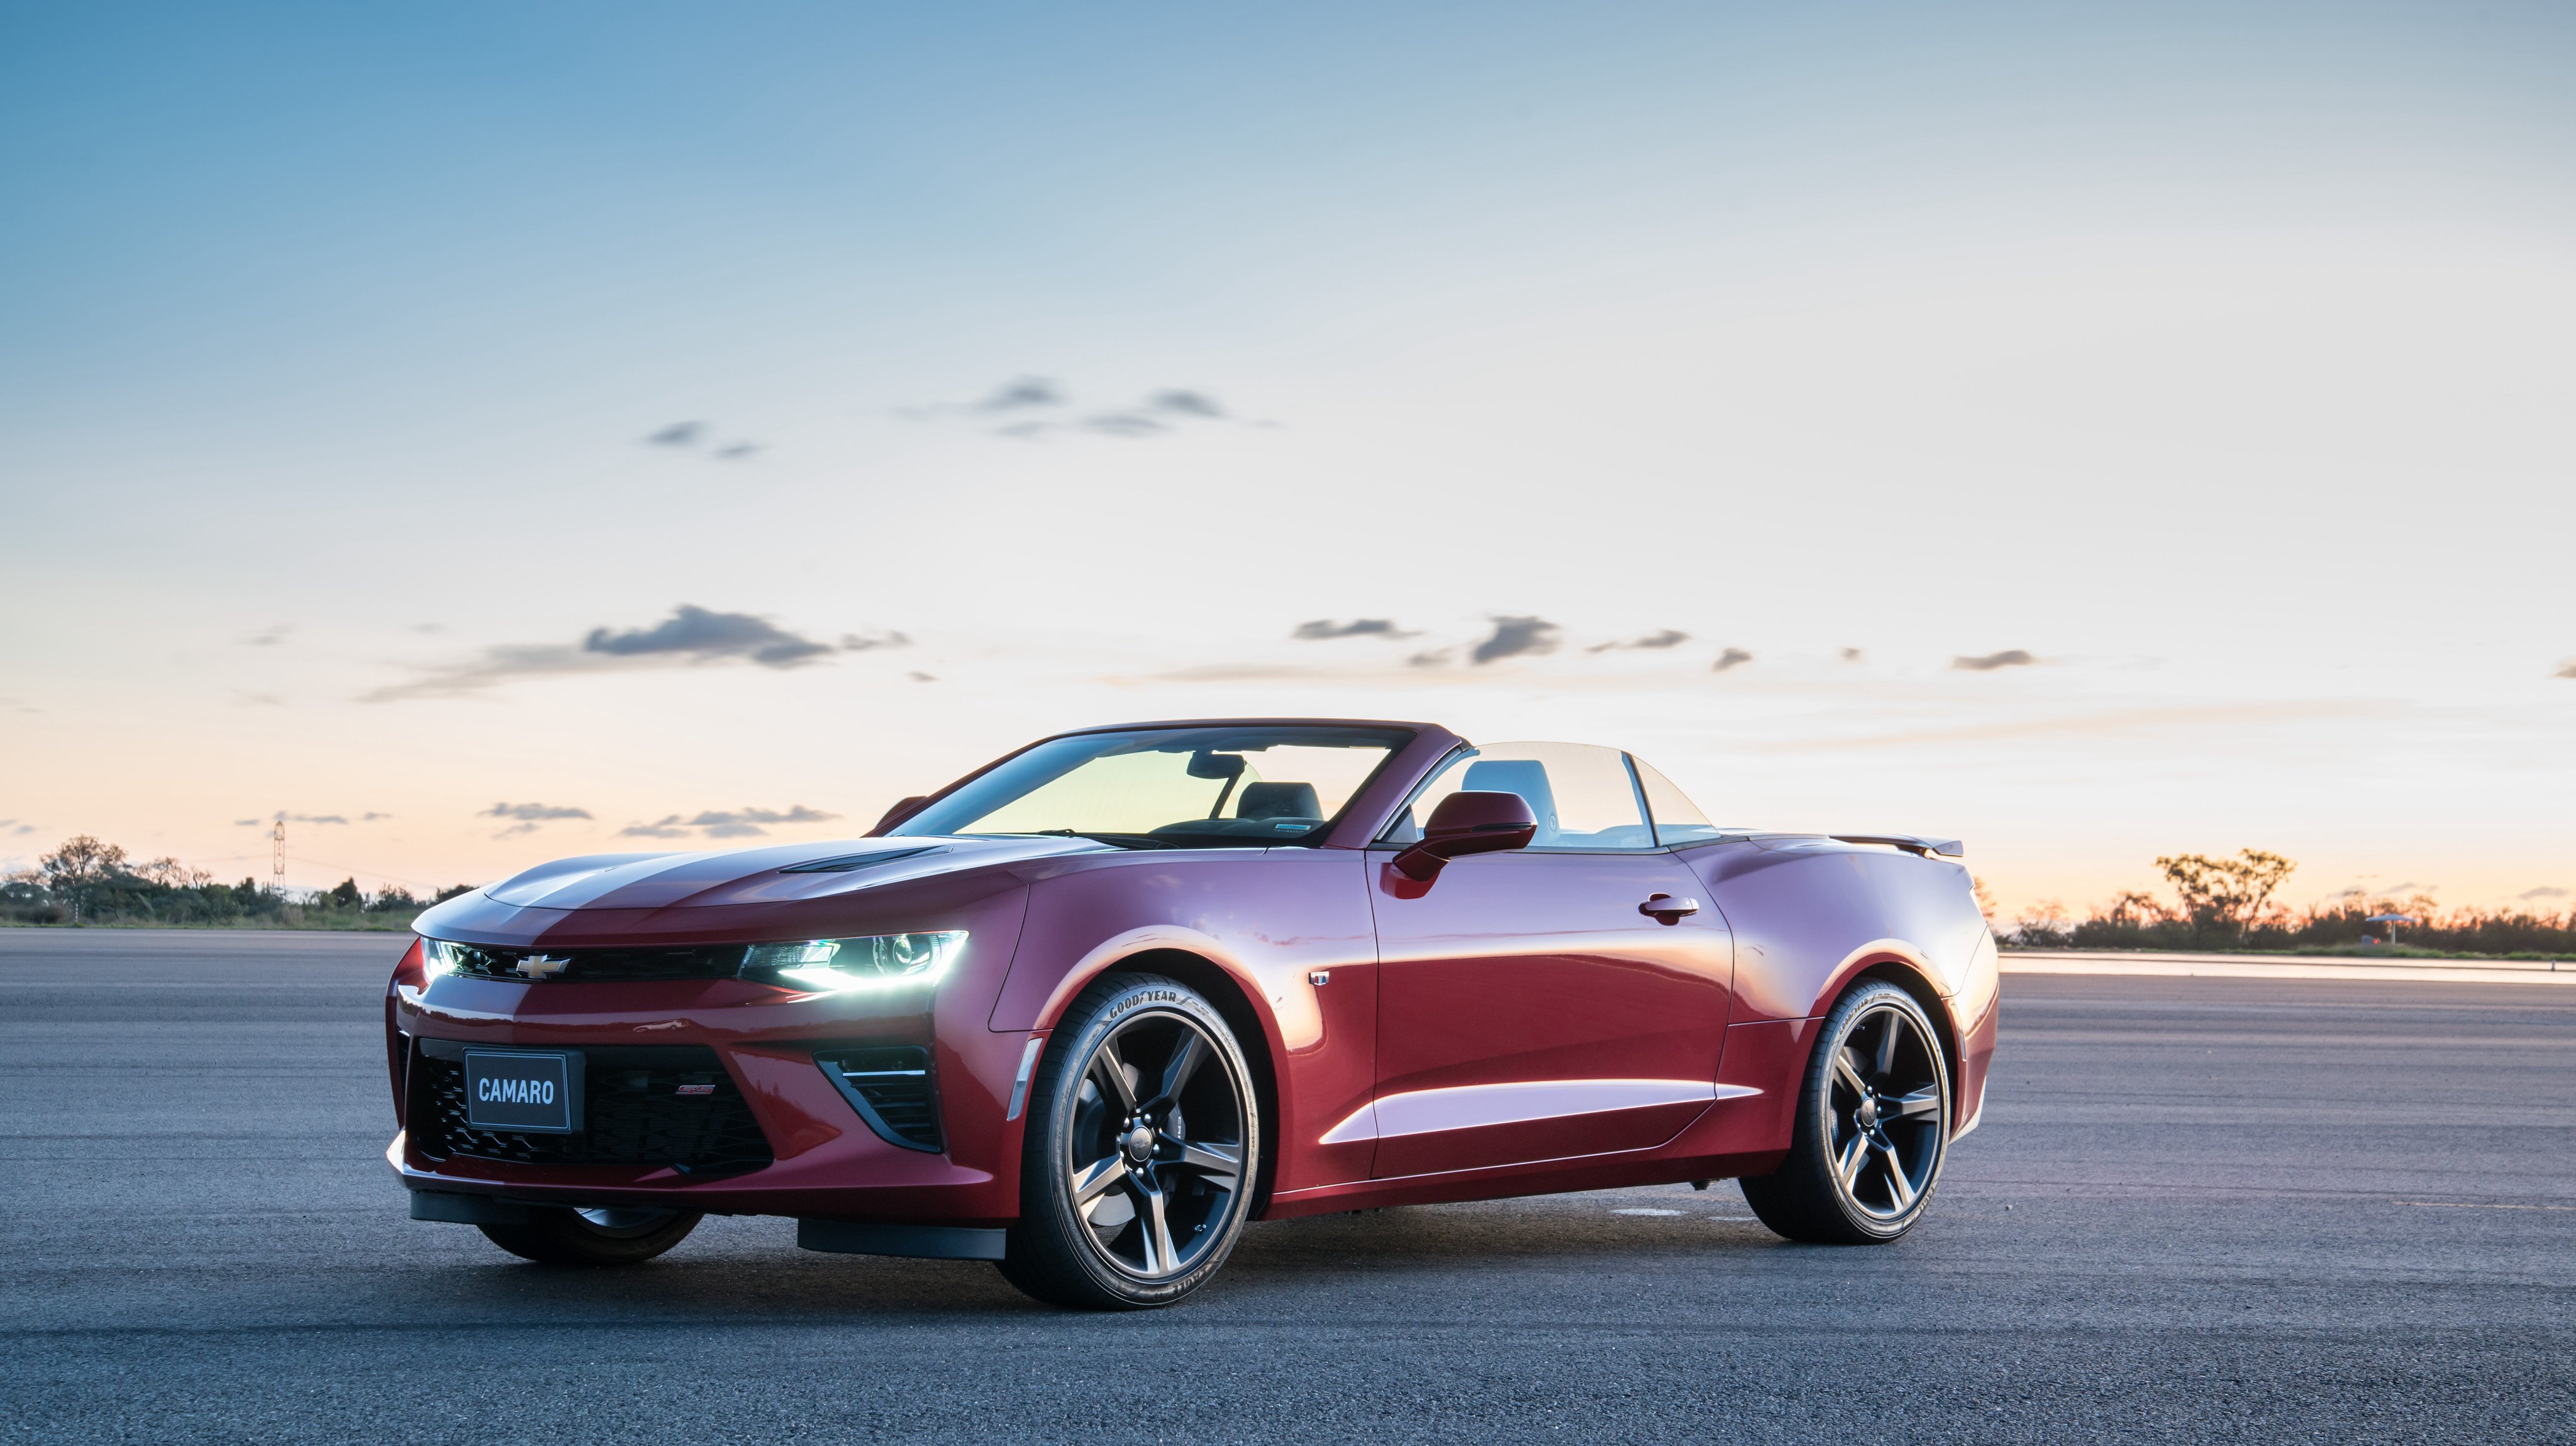 Chevrolet Camaro Ss Convertible Cars Red 2016 Wallpapers Hd